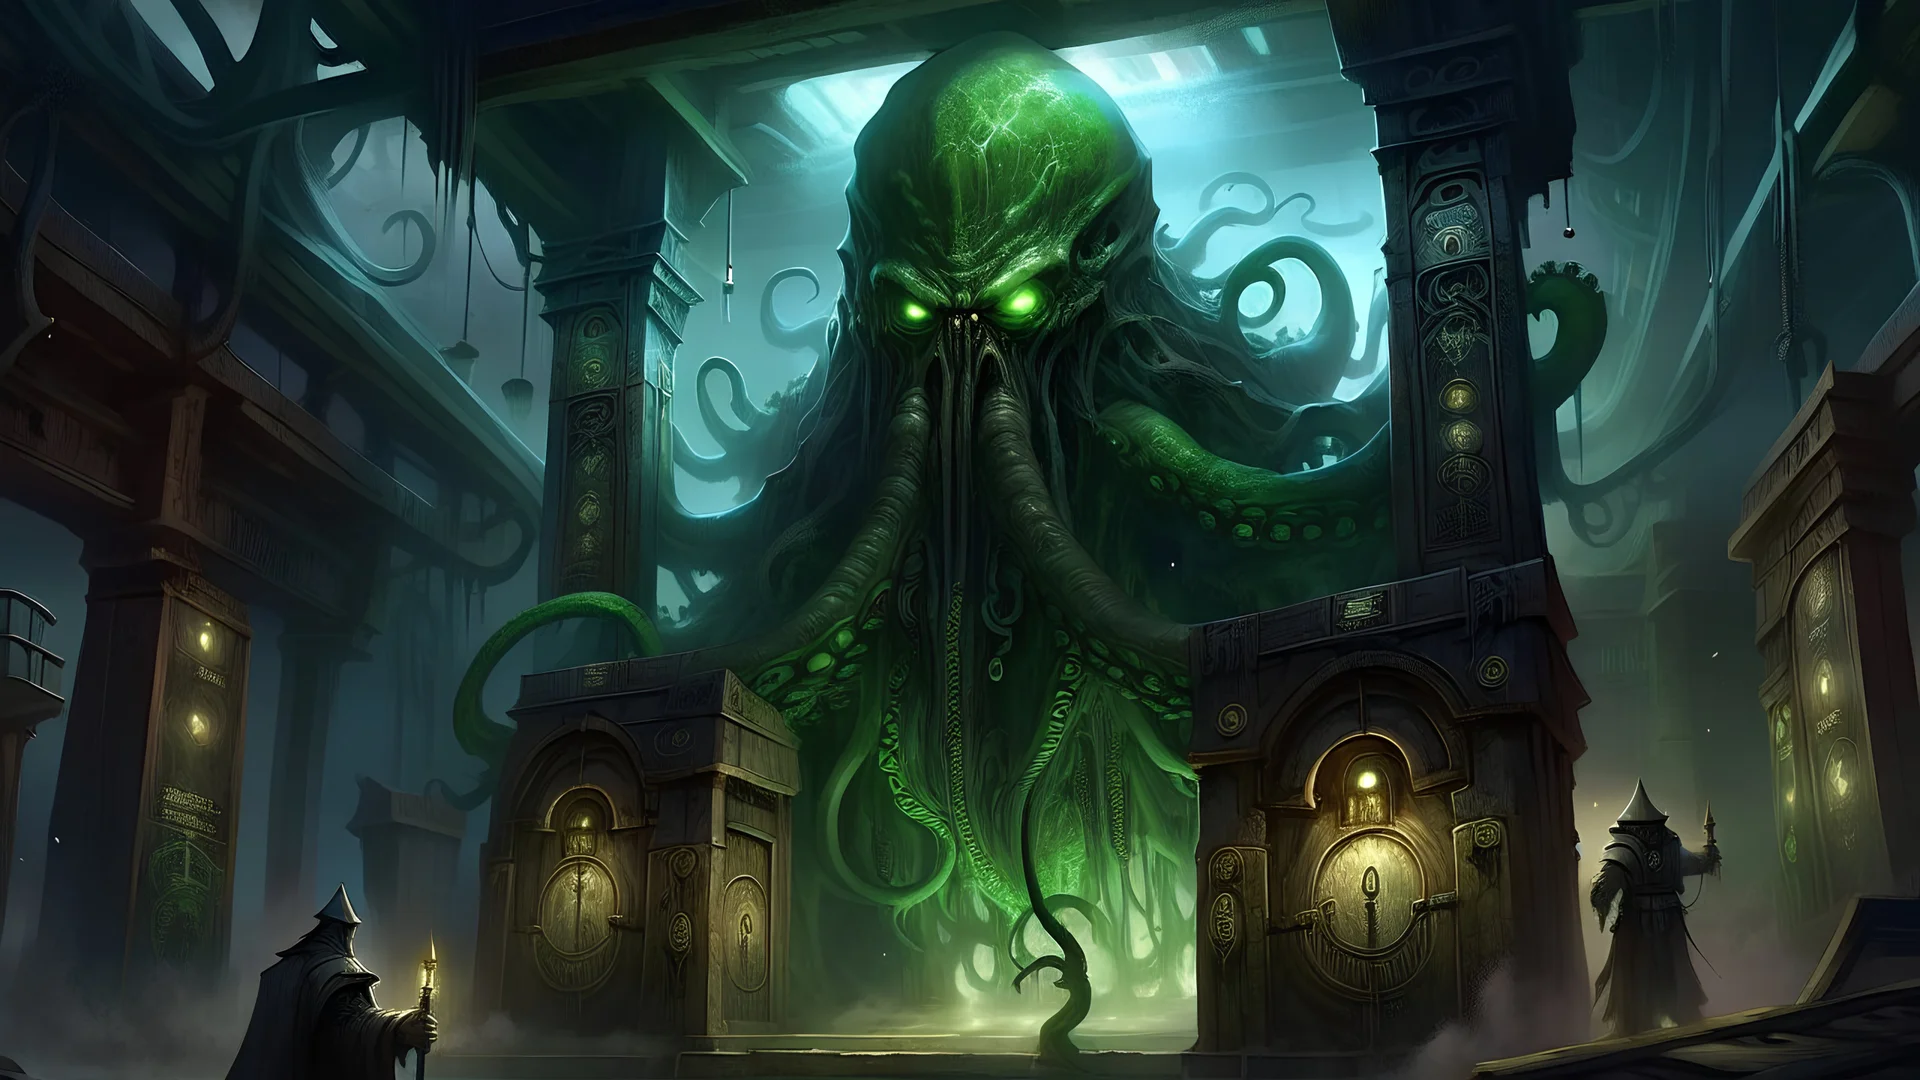 Please generate an LEGENDARY image with CTHULU stepping through a portal in a Cyberpunk cloud city.